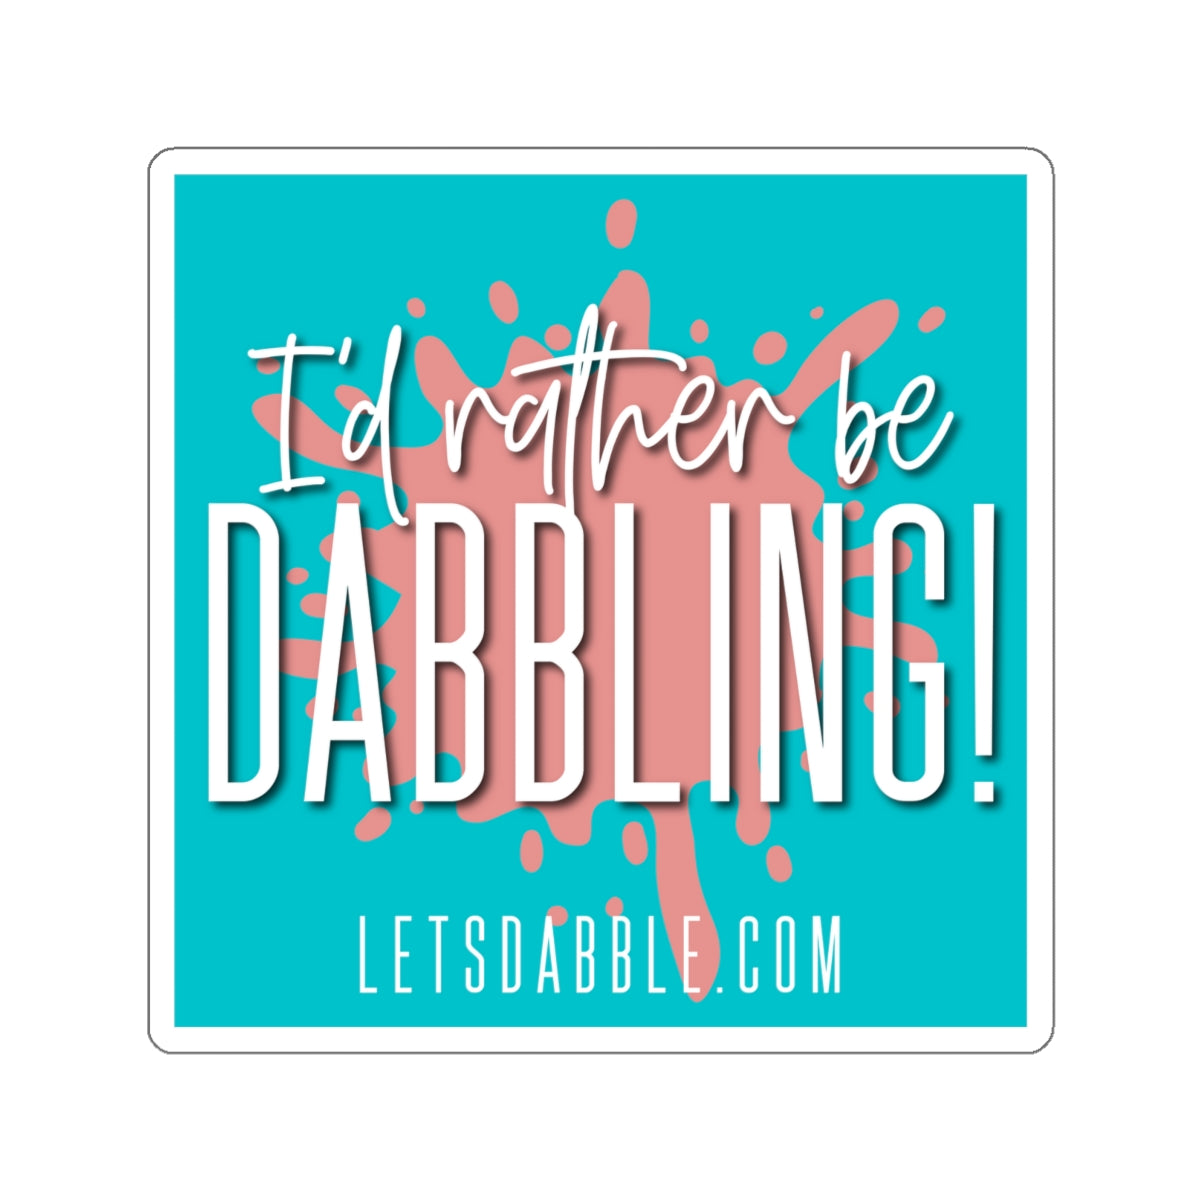 I'd rather be Dabbling sticker